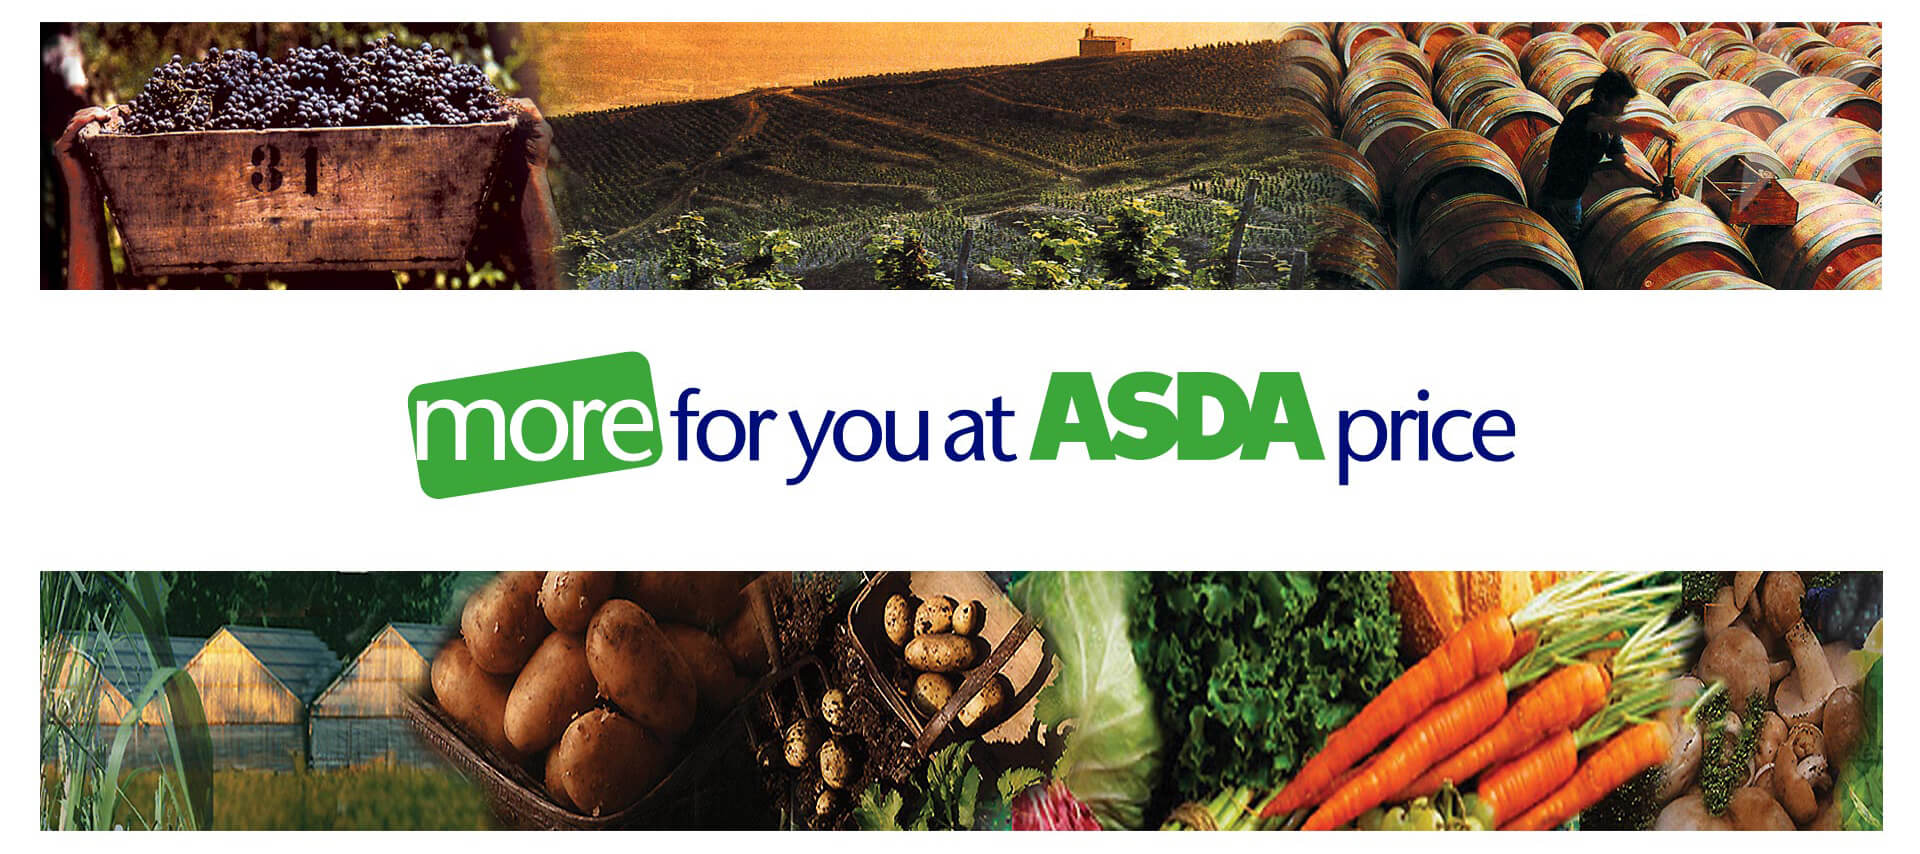 In store department graphics forwine and fruit and vegetables, more for you at Asda price